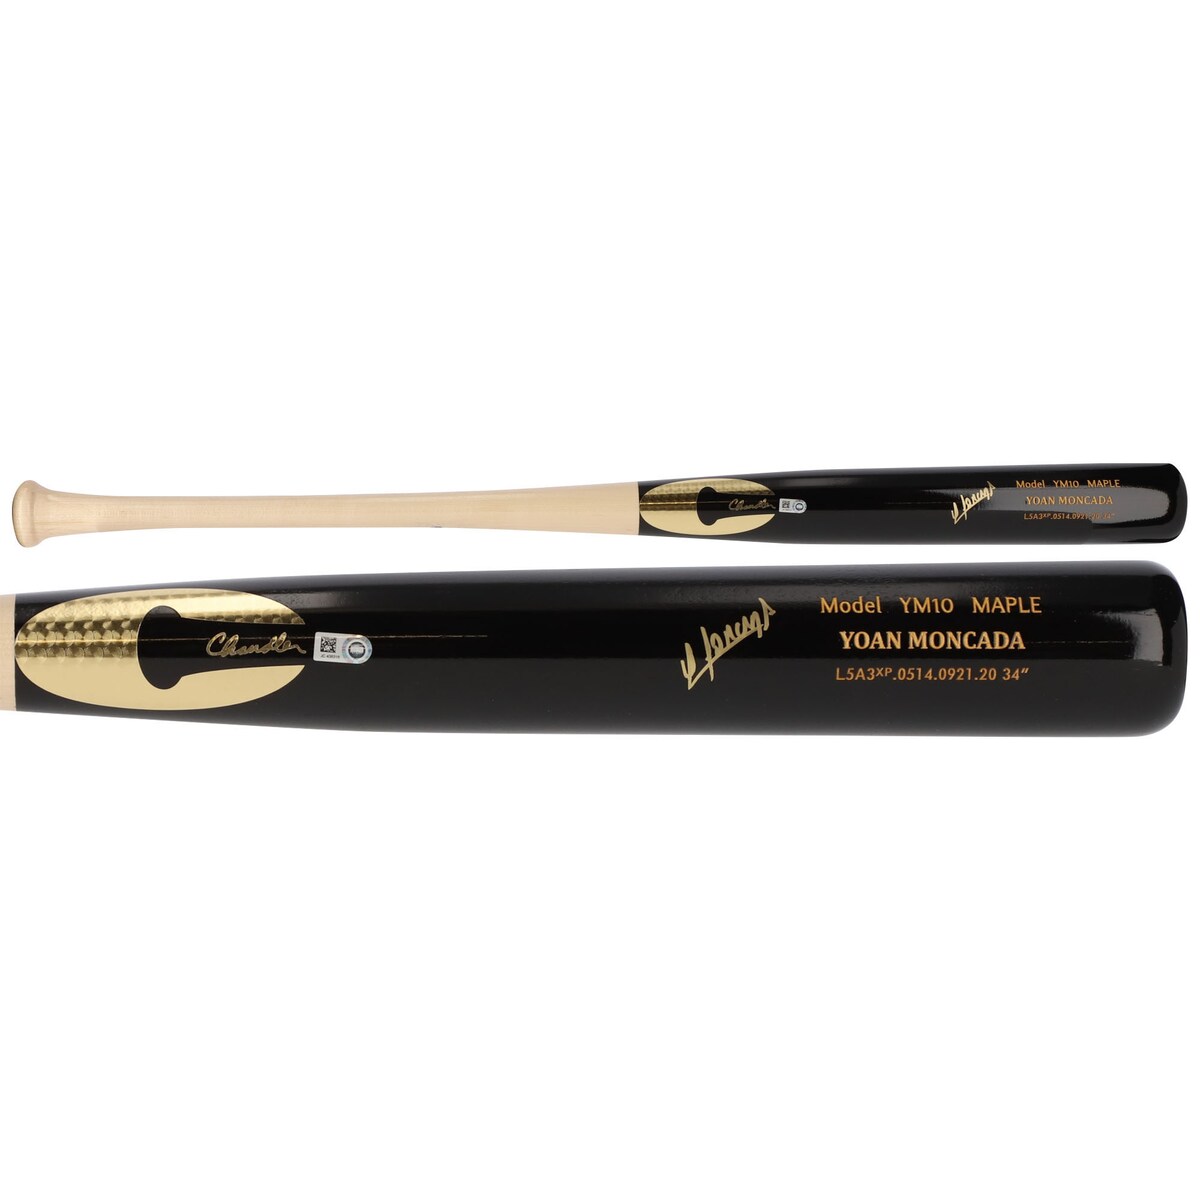 Showcase your Chicago White Sox fandom in a big way with this Yoan Moncada autographed wood bat. Displaying Yoan Moncada...